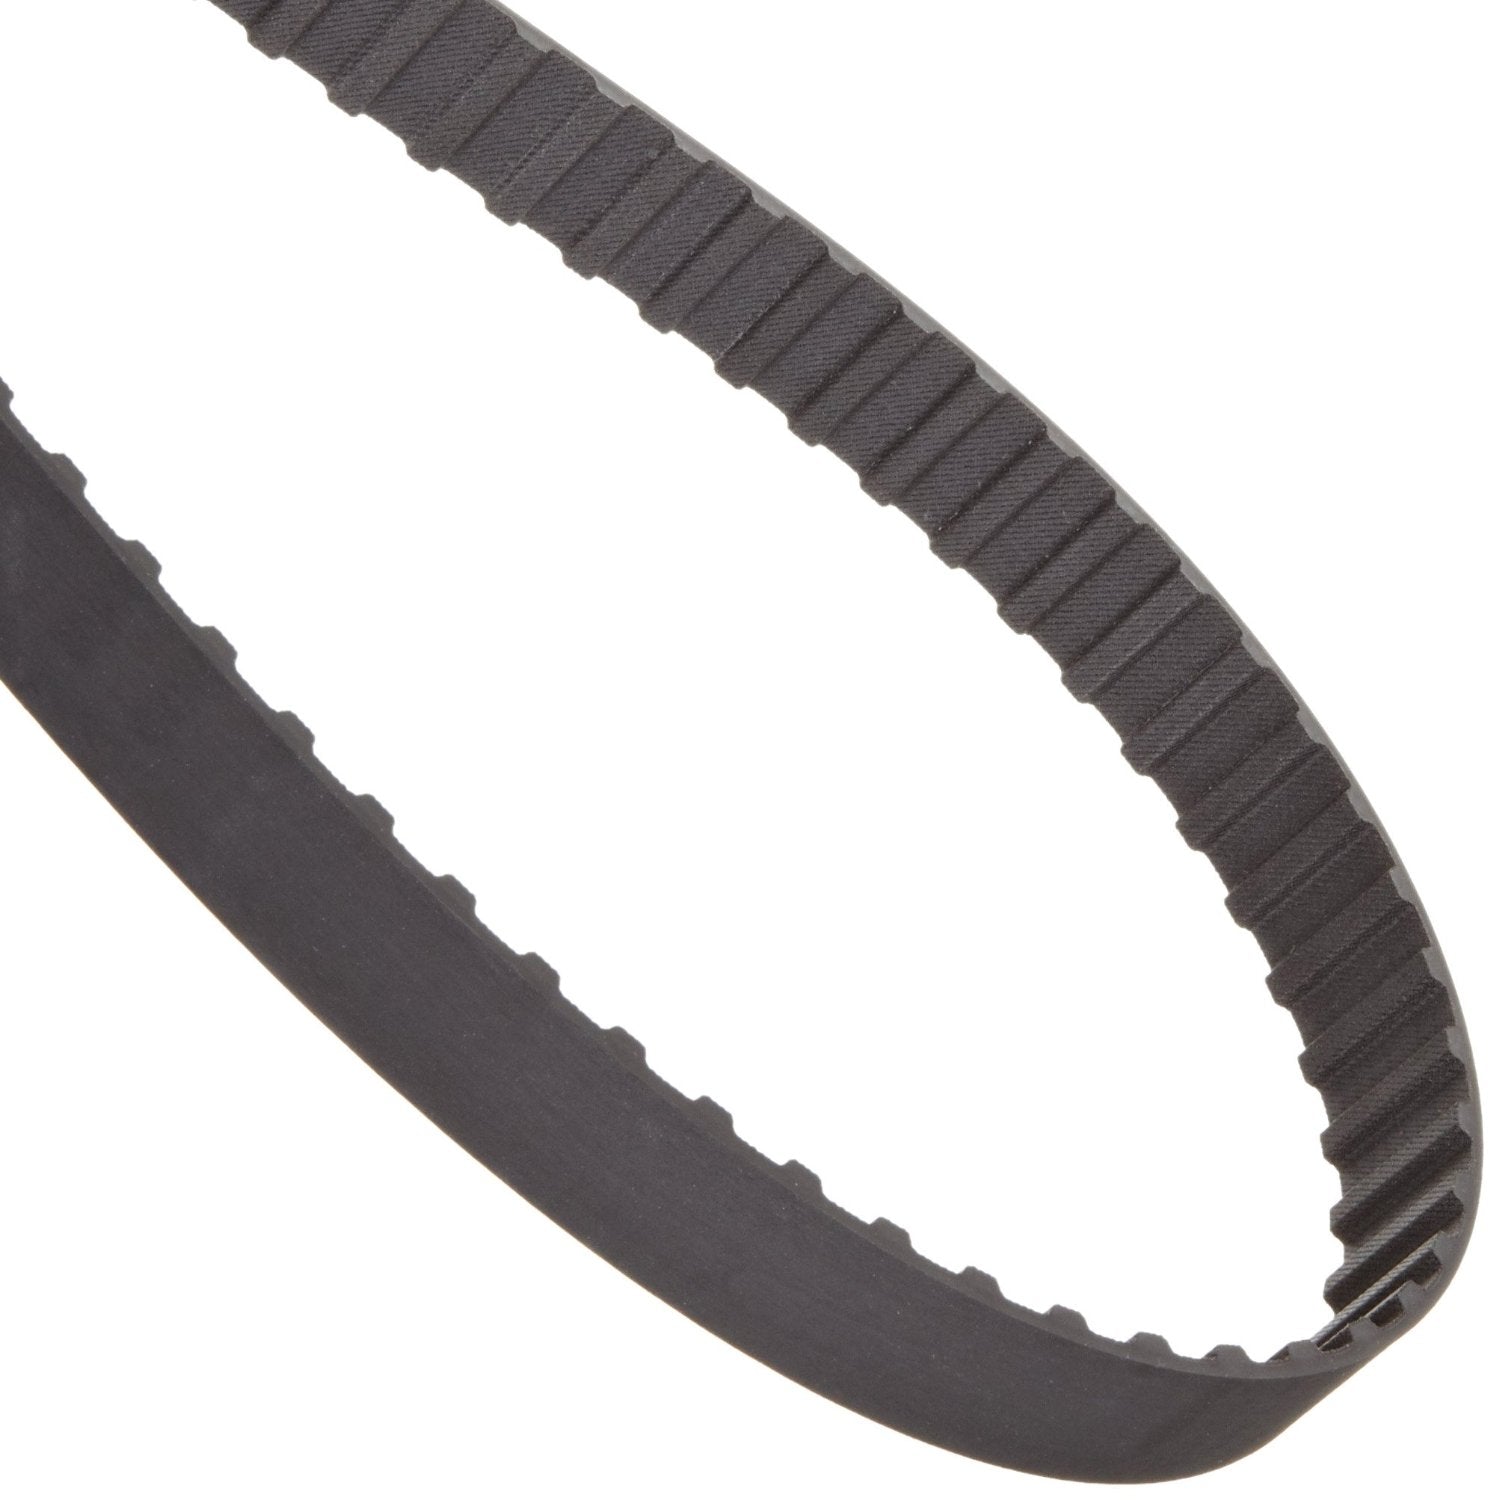 Westbend breadmaker Toothed Drive Belt 41065